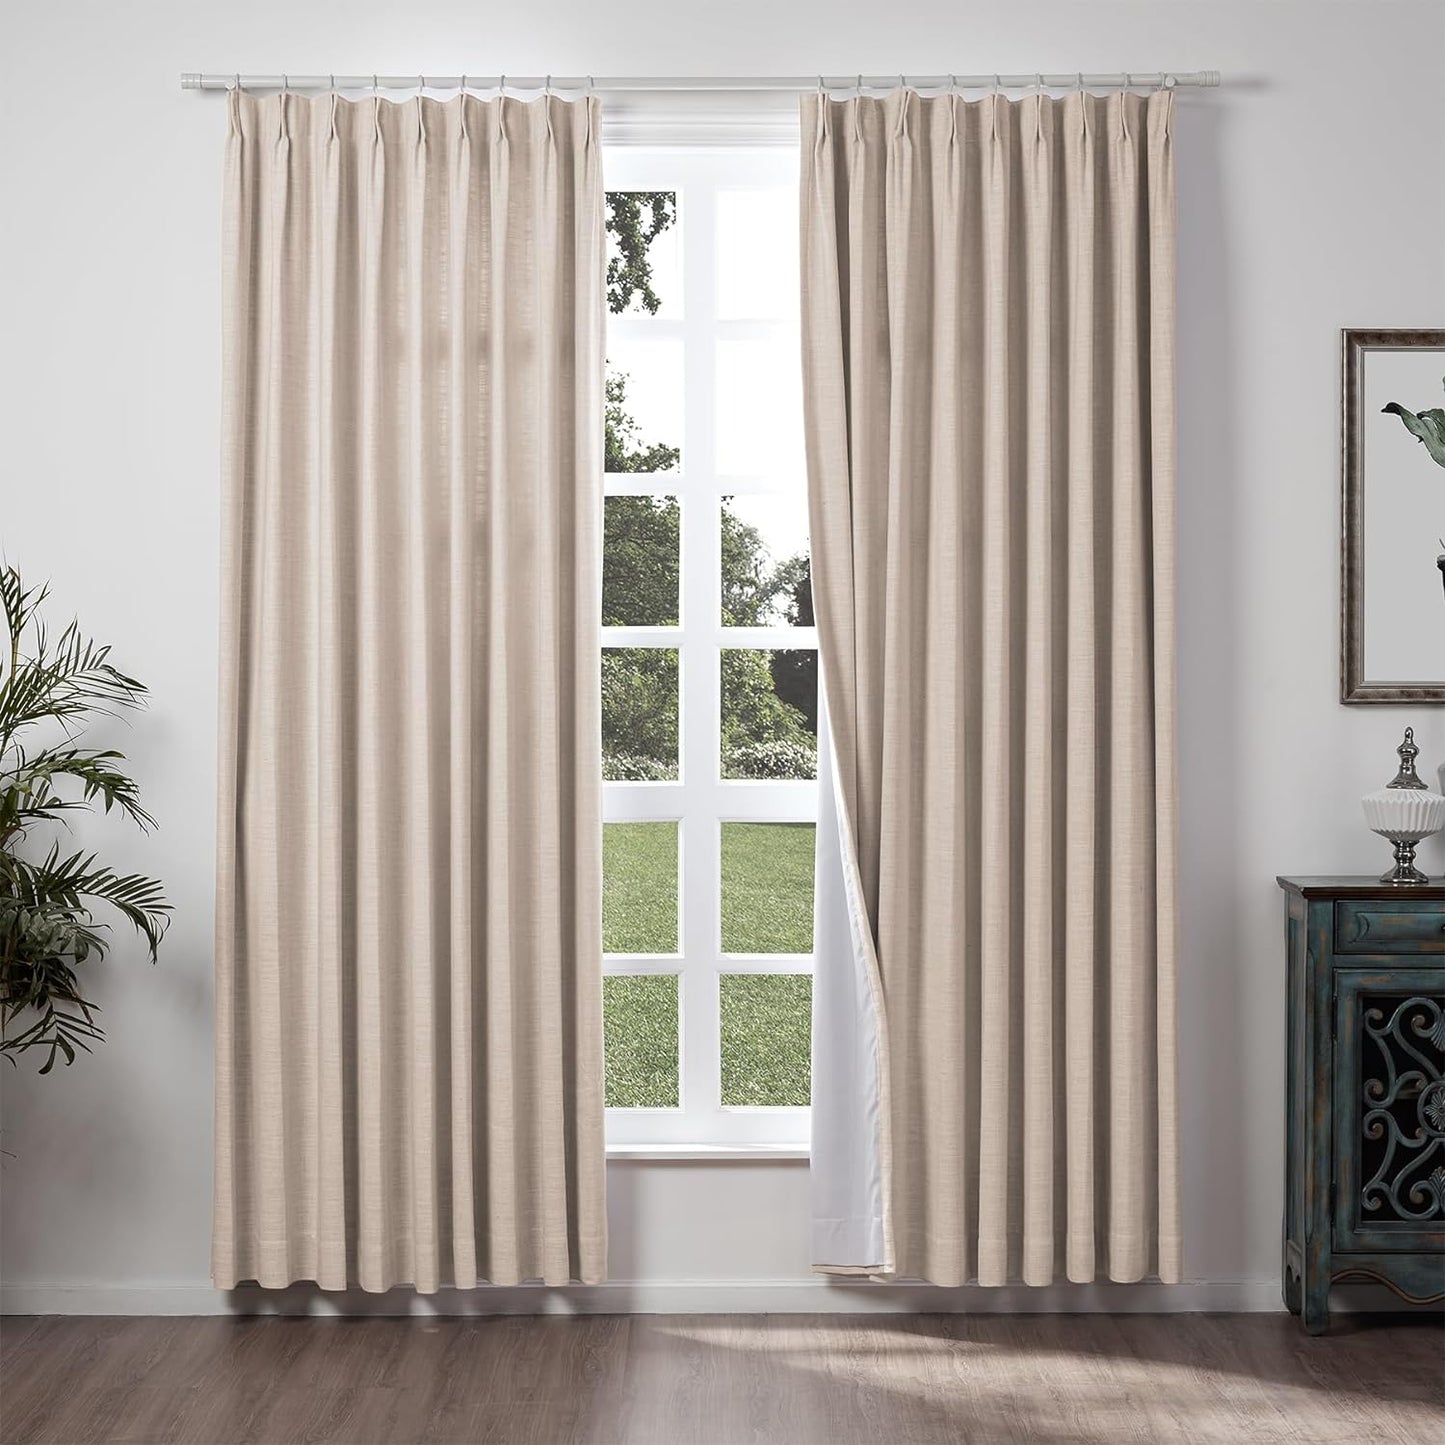 Chadmade 50" W X 84" L Polyester Linen Drape with Blackout Lining Pinch Pleat Curtain for Sliding Door Patio Door Living Room Bedroom, (1 Panel) Beige White Liz Collection  ChadMade Tapioca (7) 100Wx96L 